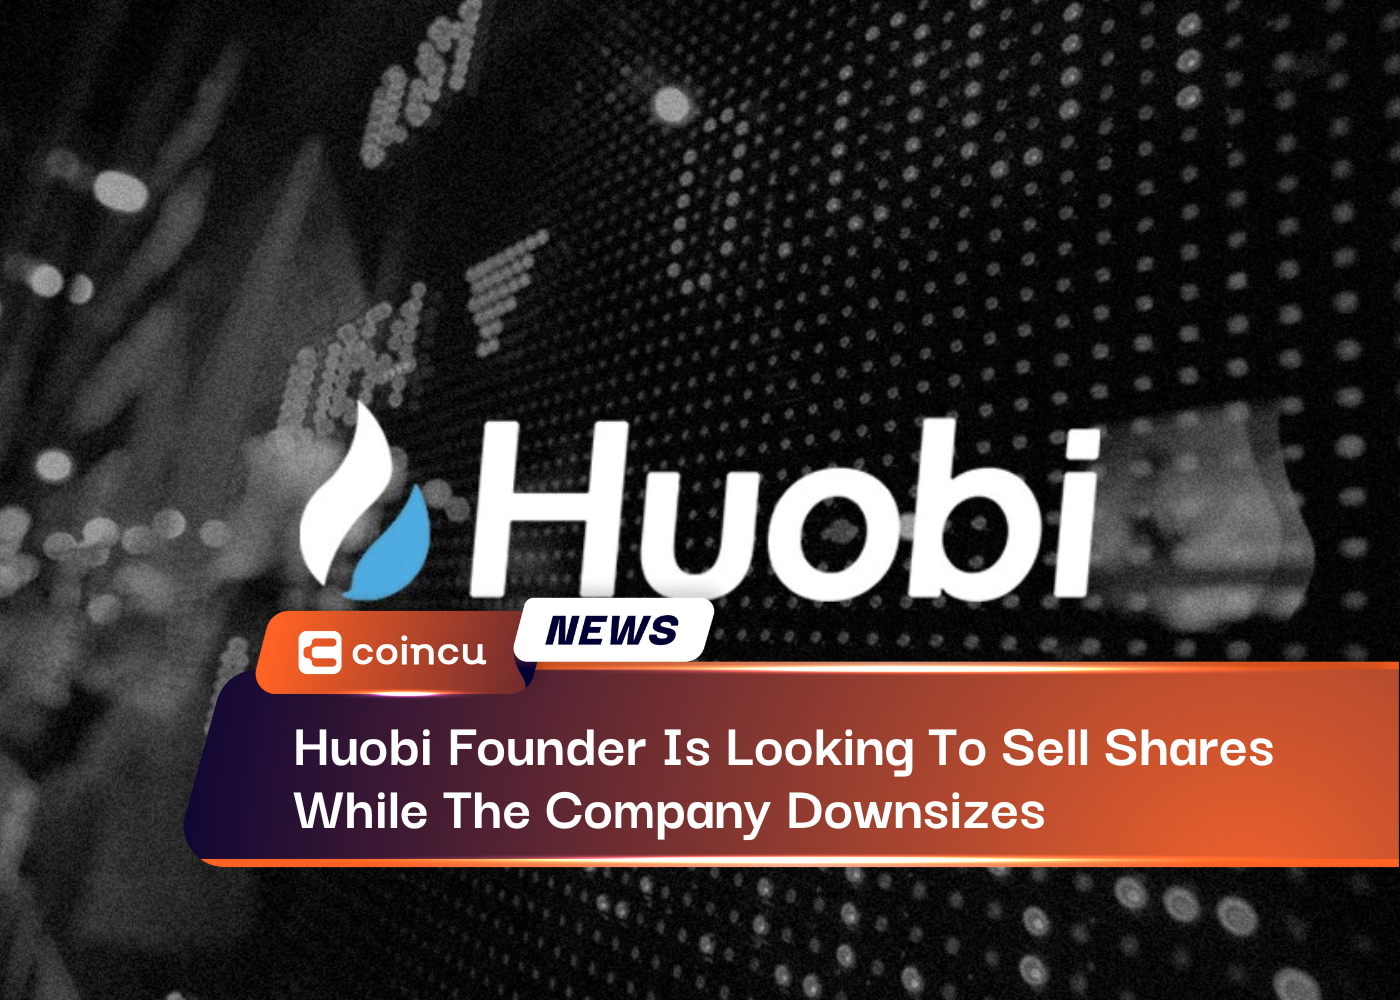 Huobi Founder Is Looking To Sell Shares While The Company Downsizes